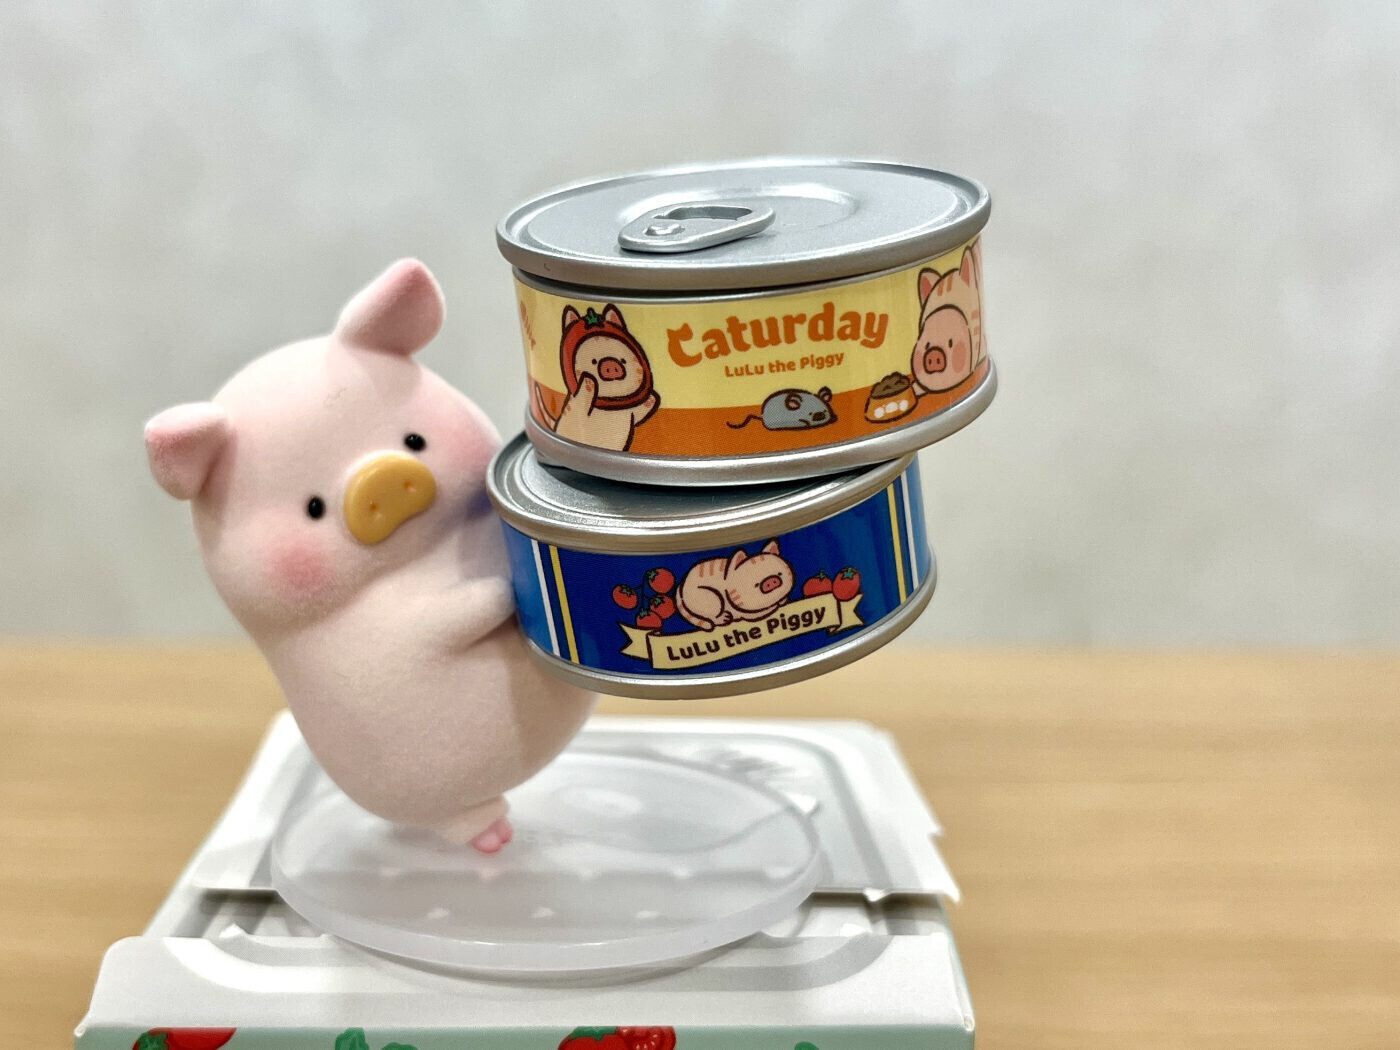 Primary image for TOYZEROPLUS x CICI'S STORY LULU PIG THE PIGGY Caturday Canned Food Figure Toy